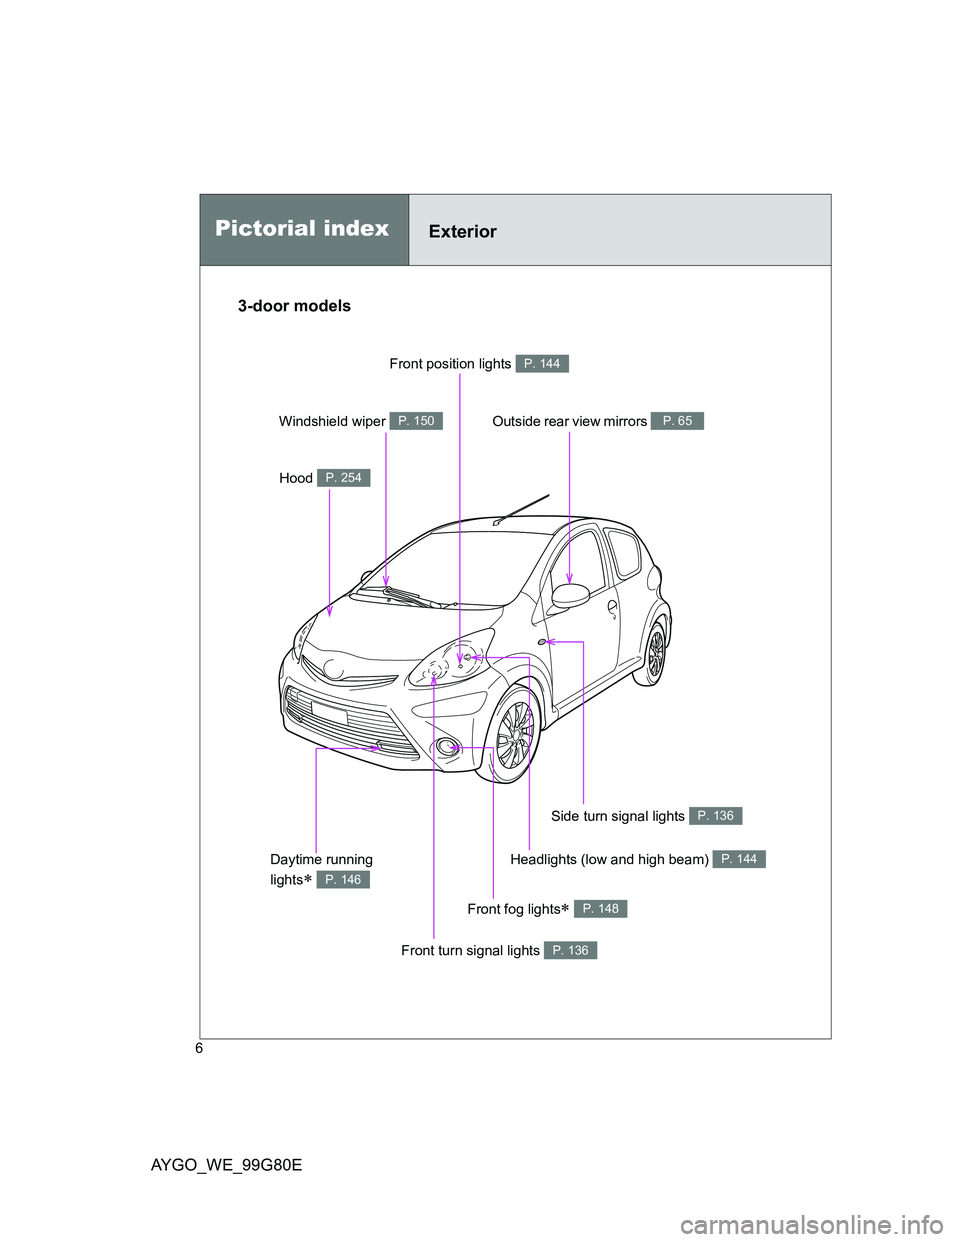 TOYOTA AYGO 2013  Owners Manual (in English) AYGO_WE_99G80E
6
Front fog lights P. 148
Pictorial indexExterior
Front turn signal lights P. 136
Side turn signal lights P. 136
Outside rear view mirrors P. 65
Headlights (low and high beam) P. 144